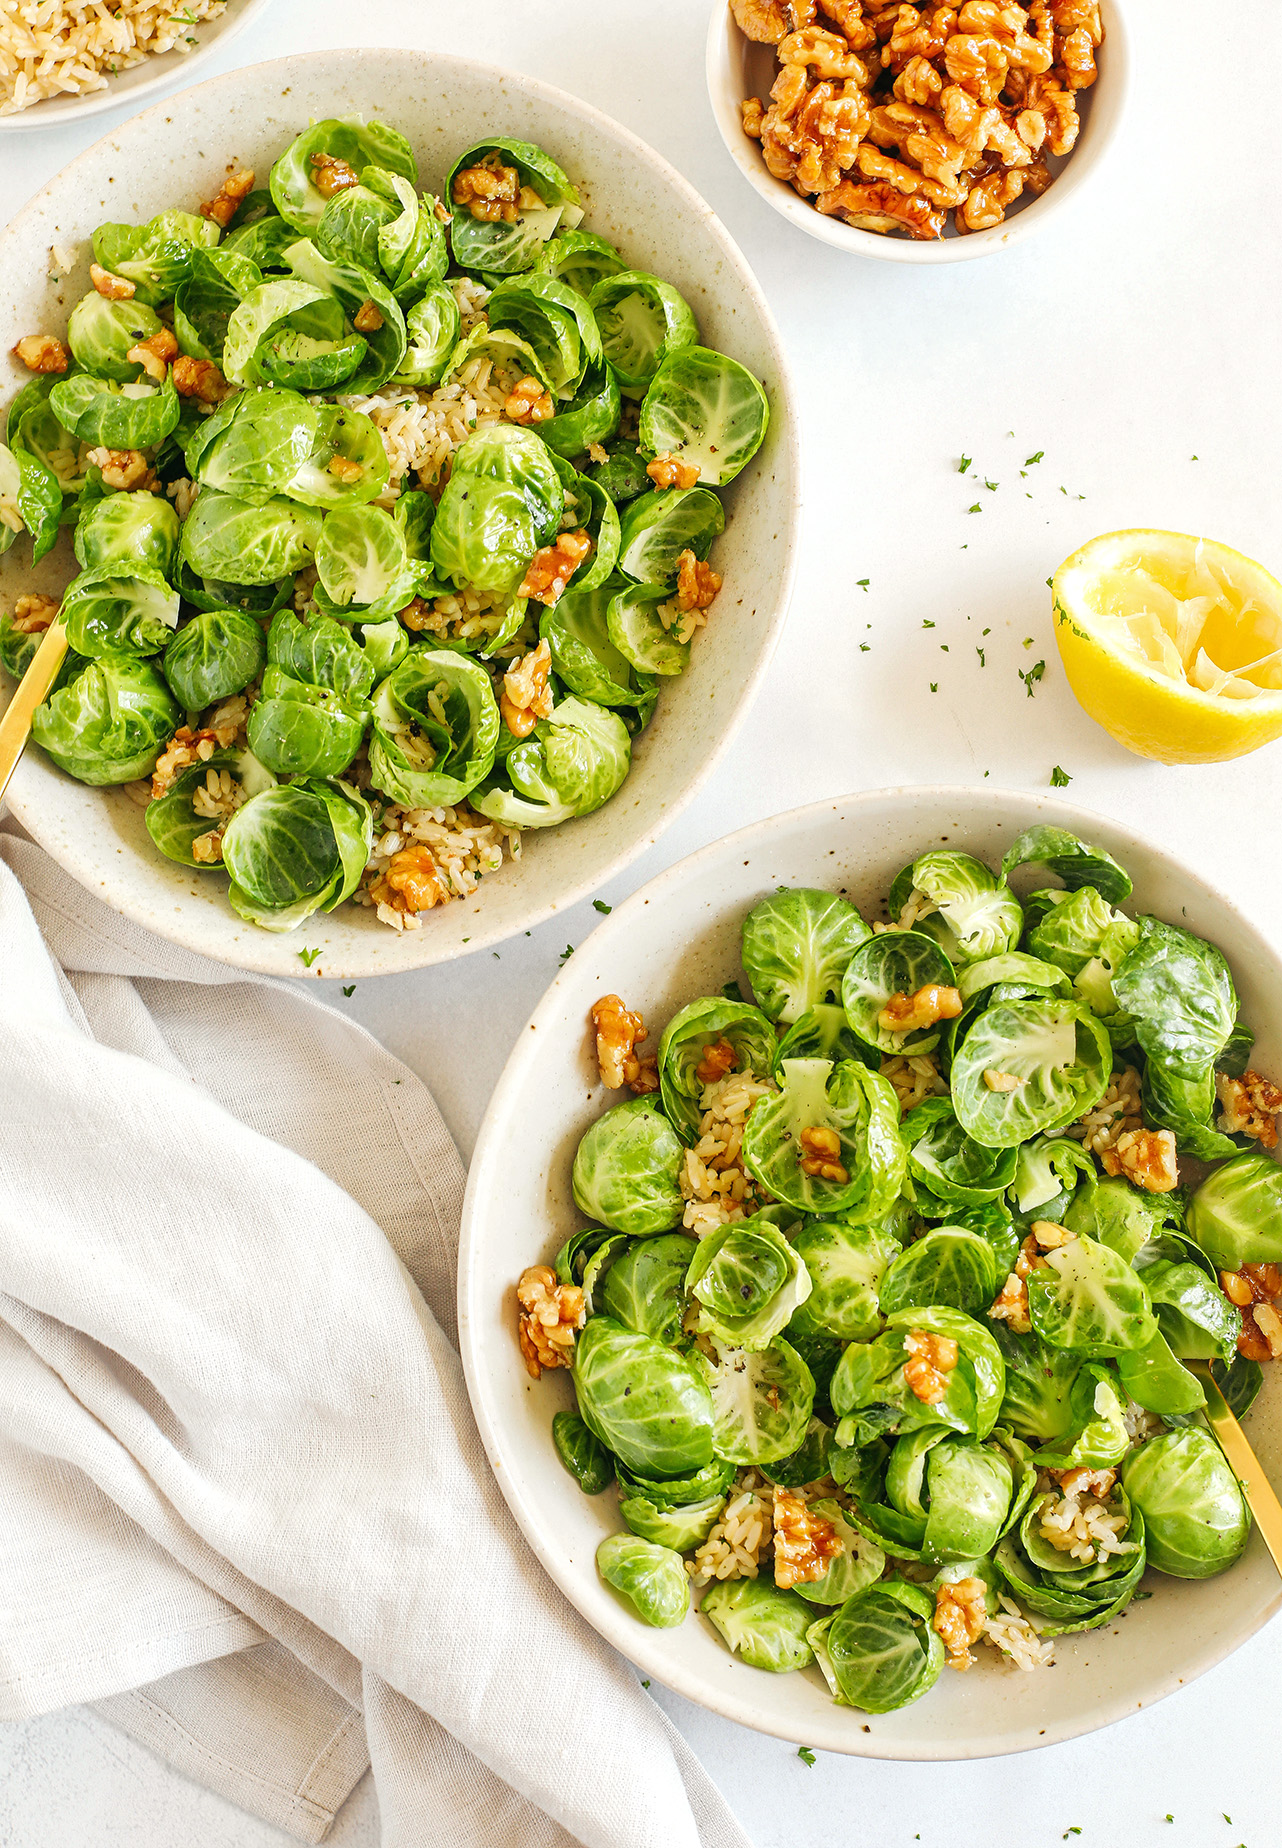 Easy and flavorful sautéed Brussels Sprout and Brown Rice Salad that makes the perfect side dish loaded with garlic, bright lemon flavor and crunchy walnuts! 